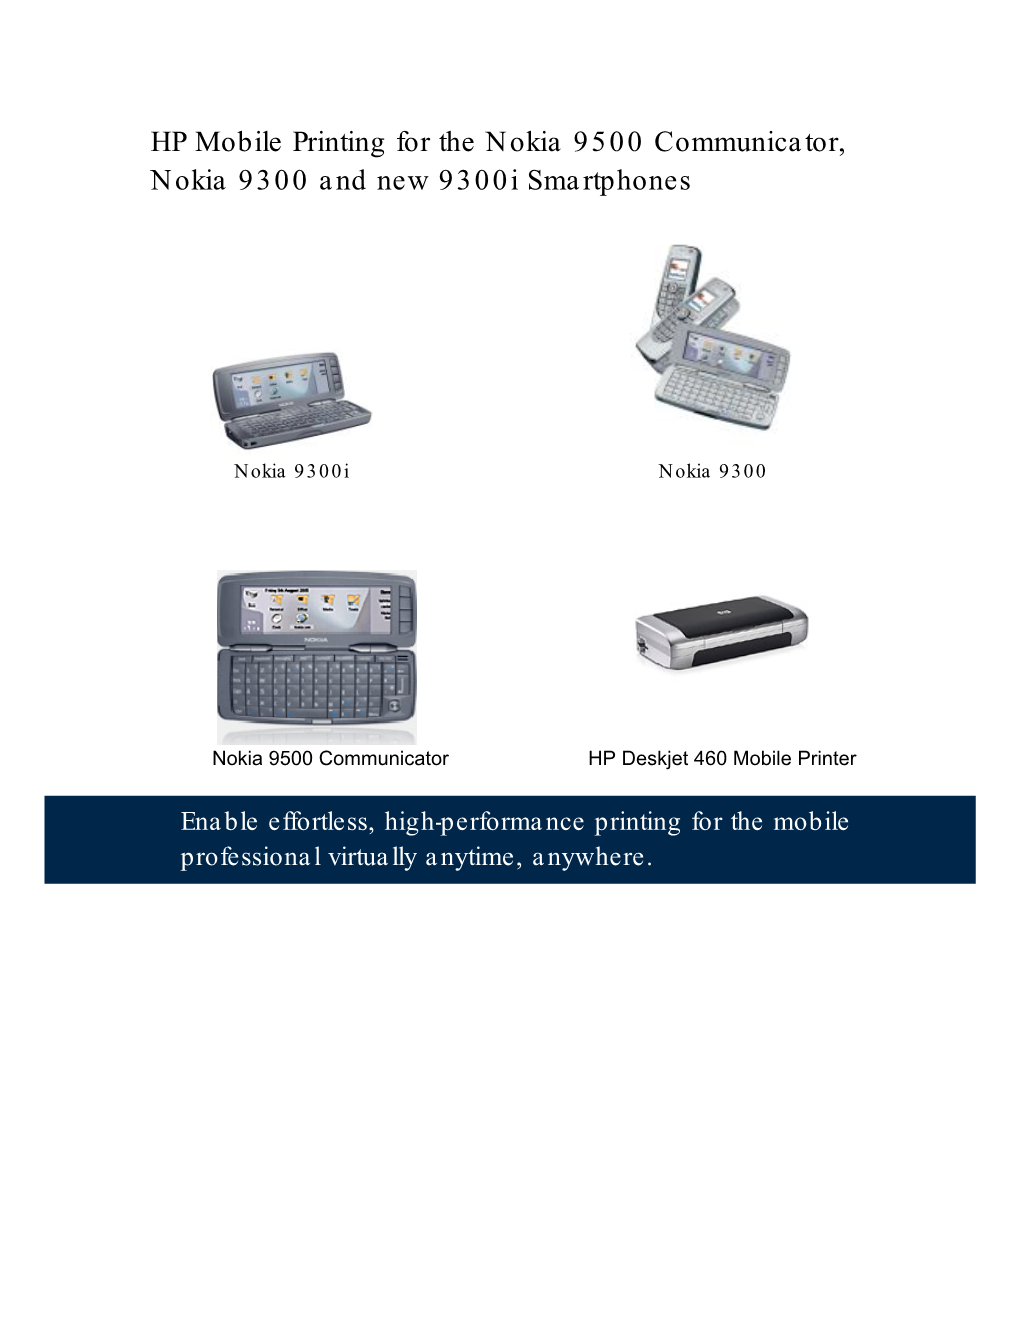 HP Mobile Printing for the Nokia 9500 Communicator, Nokia 9300 and New 9300I Smartphones